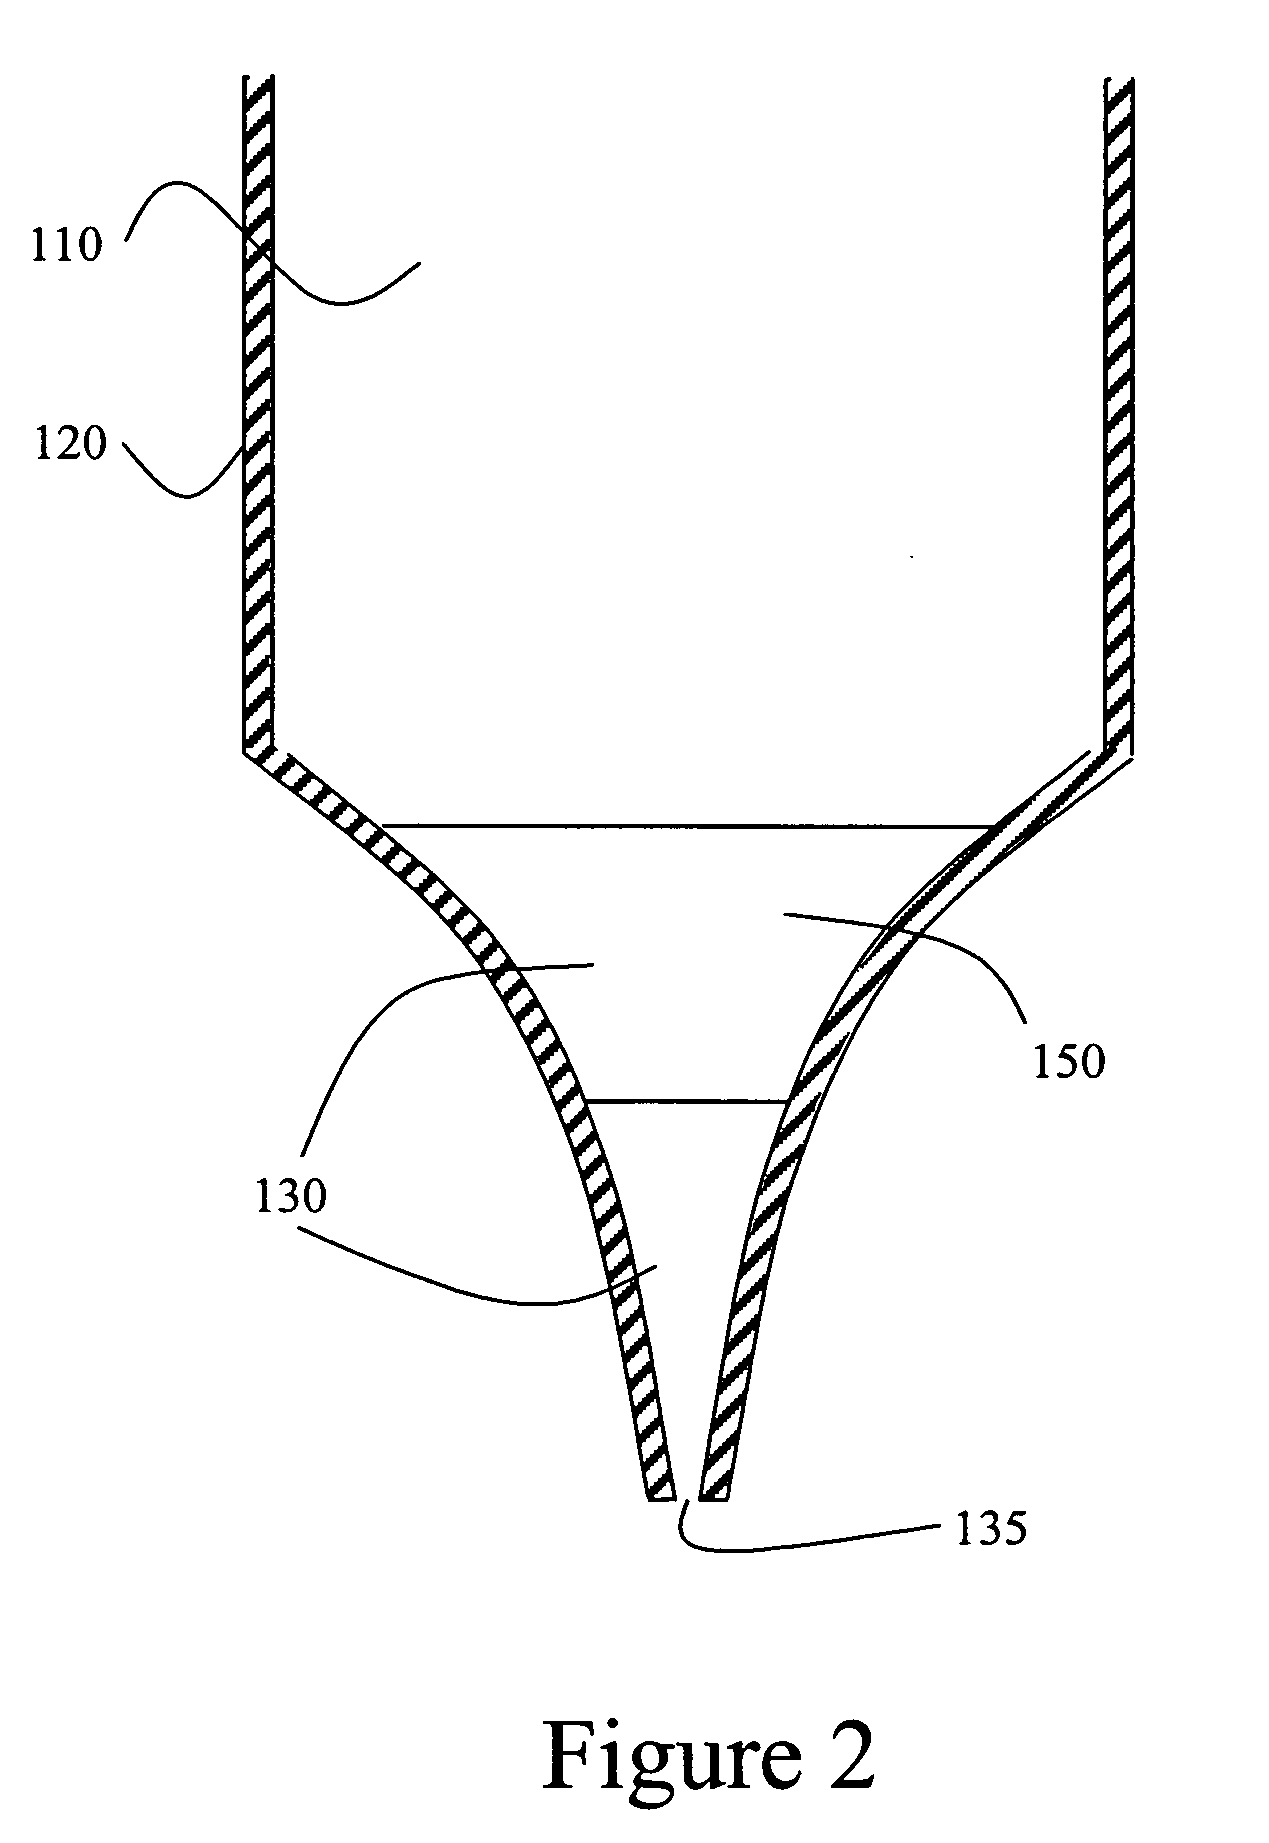 Method and apparatus for depositing material with high resolution